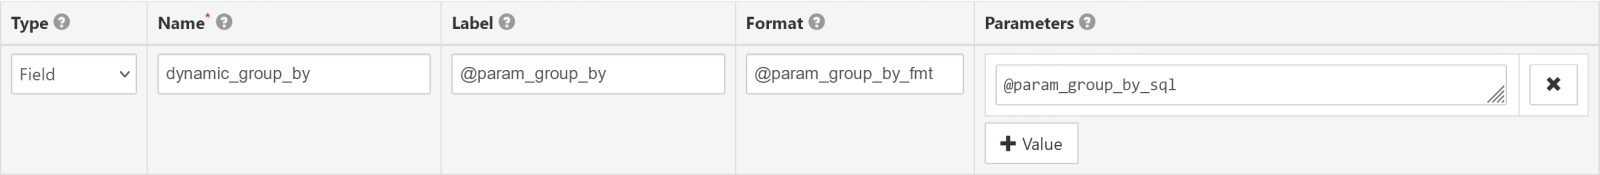 Dynamic grouping setup: add dynamic_group_by dimension